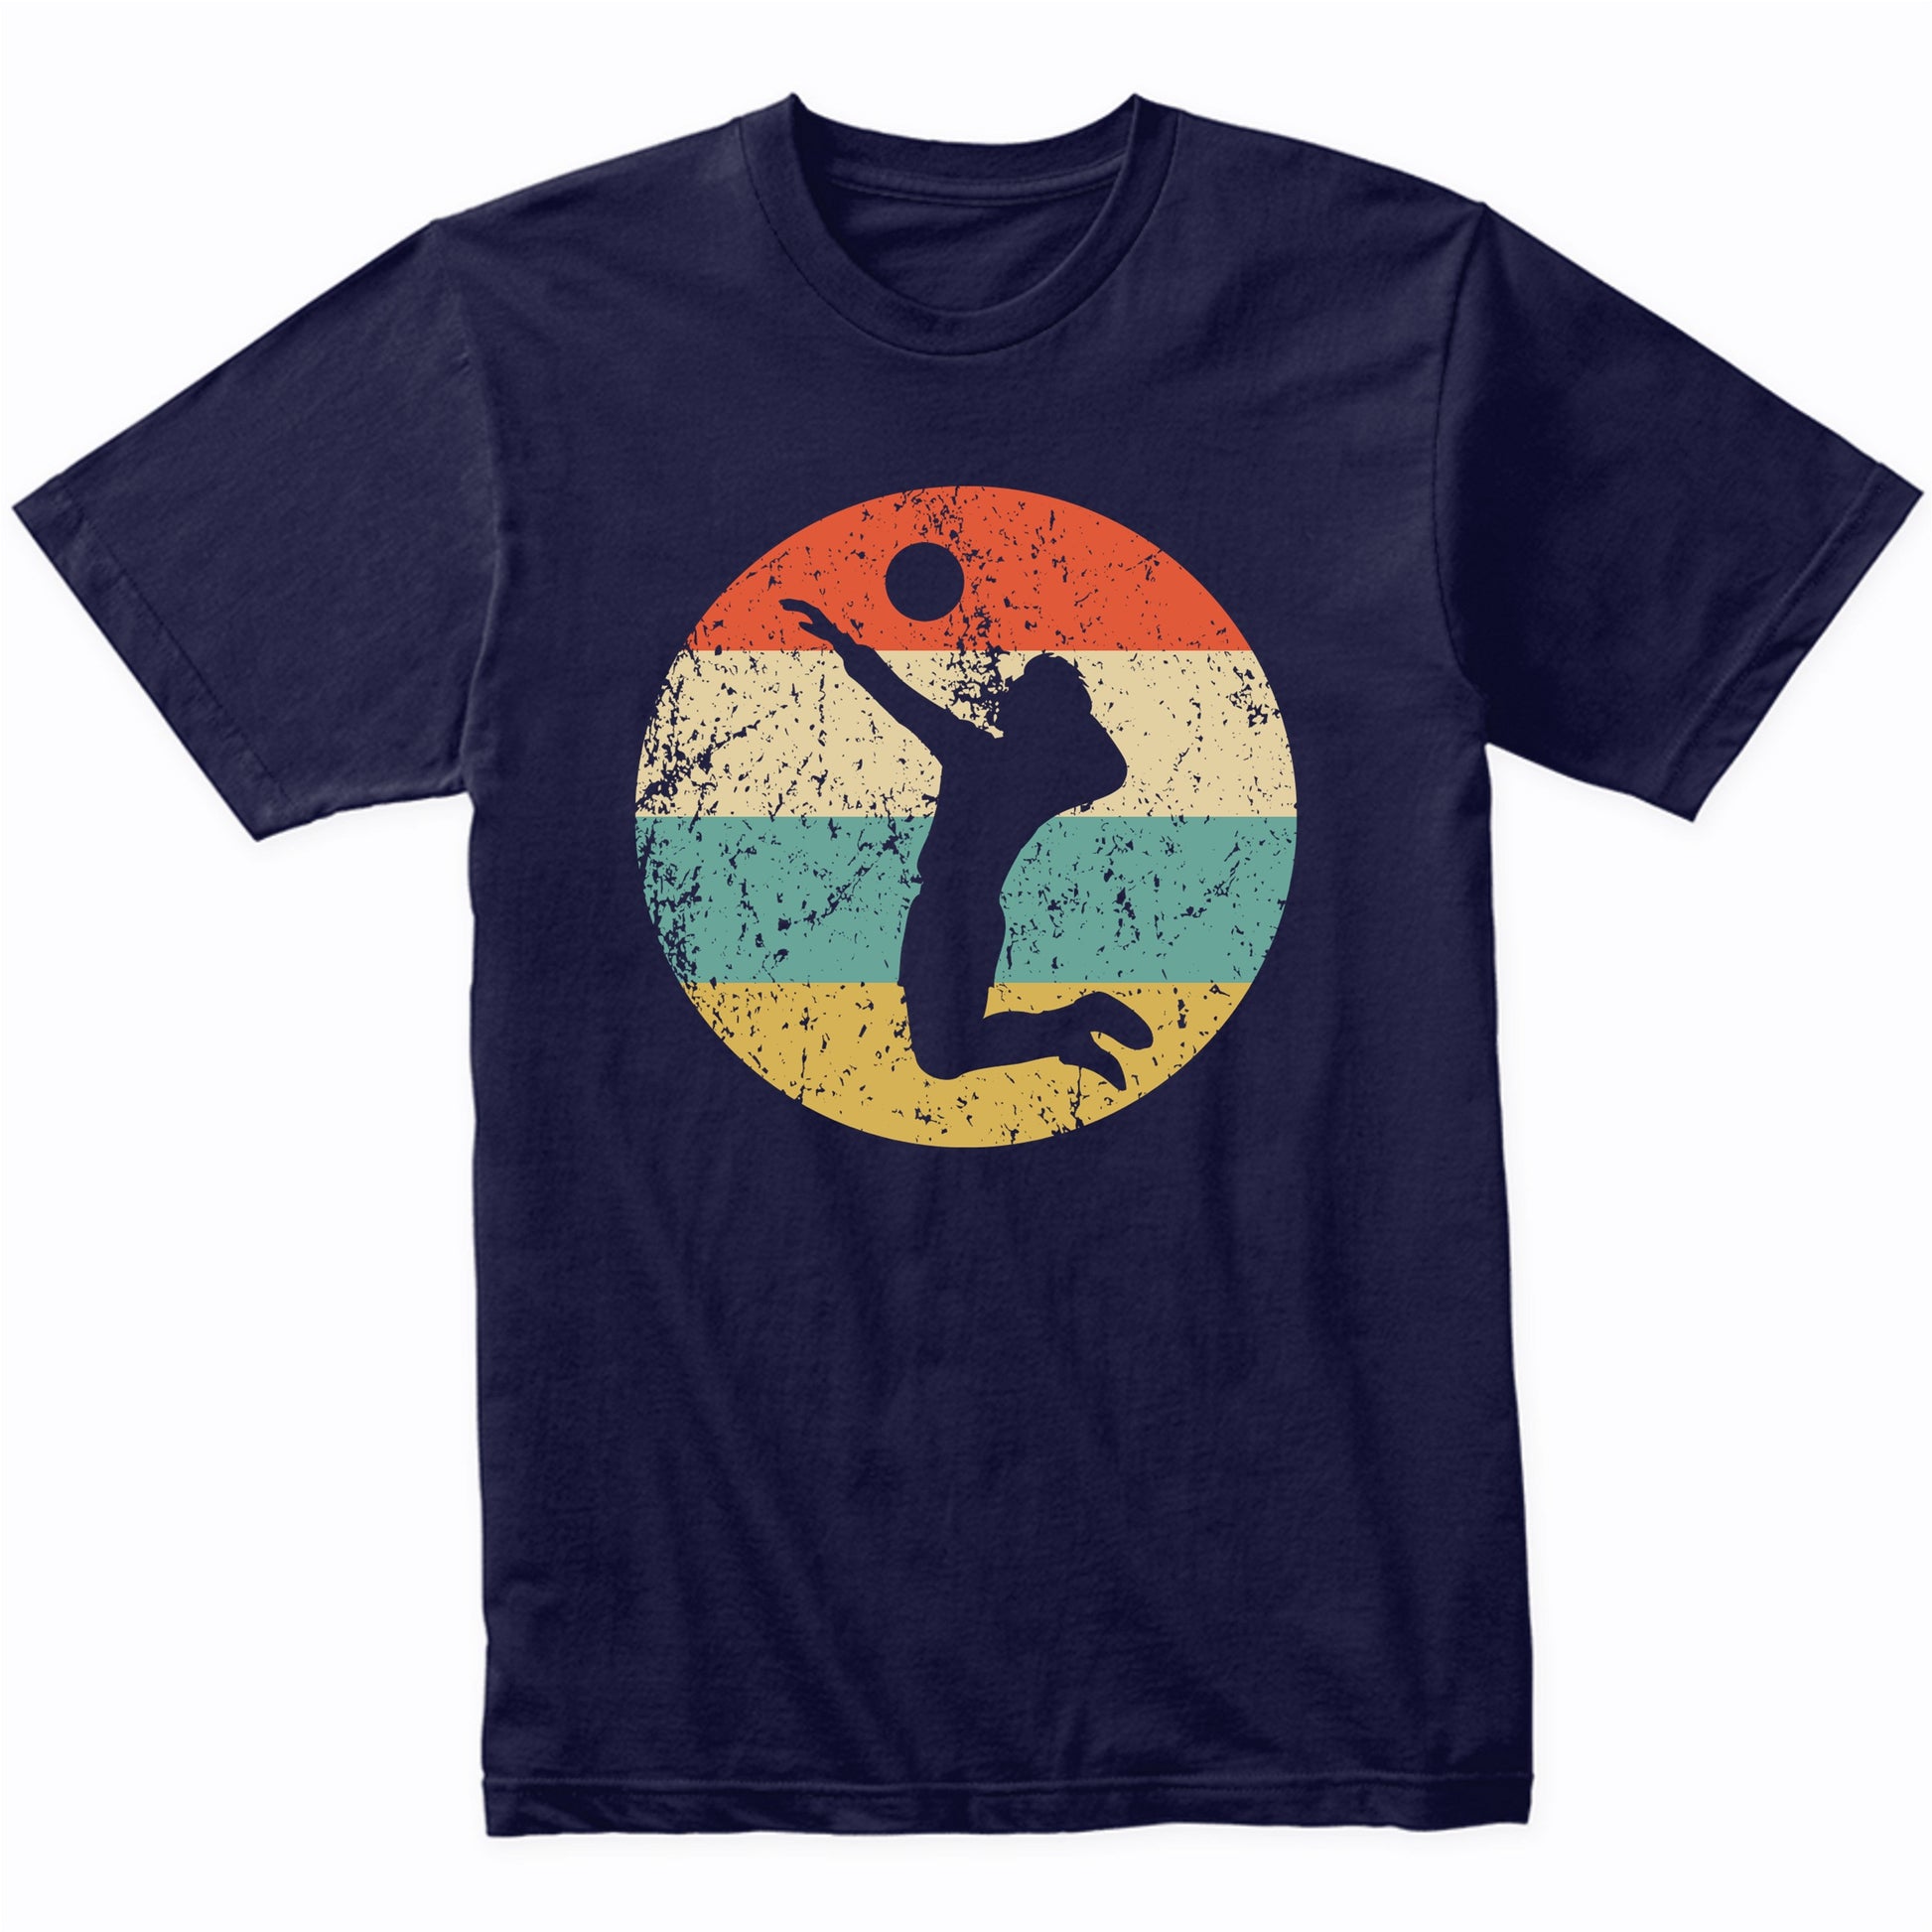 Volleyball Shirt - Vintage Retro Volleyball Player T-Shirt